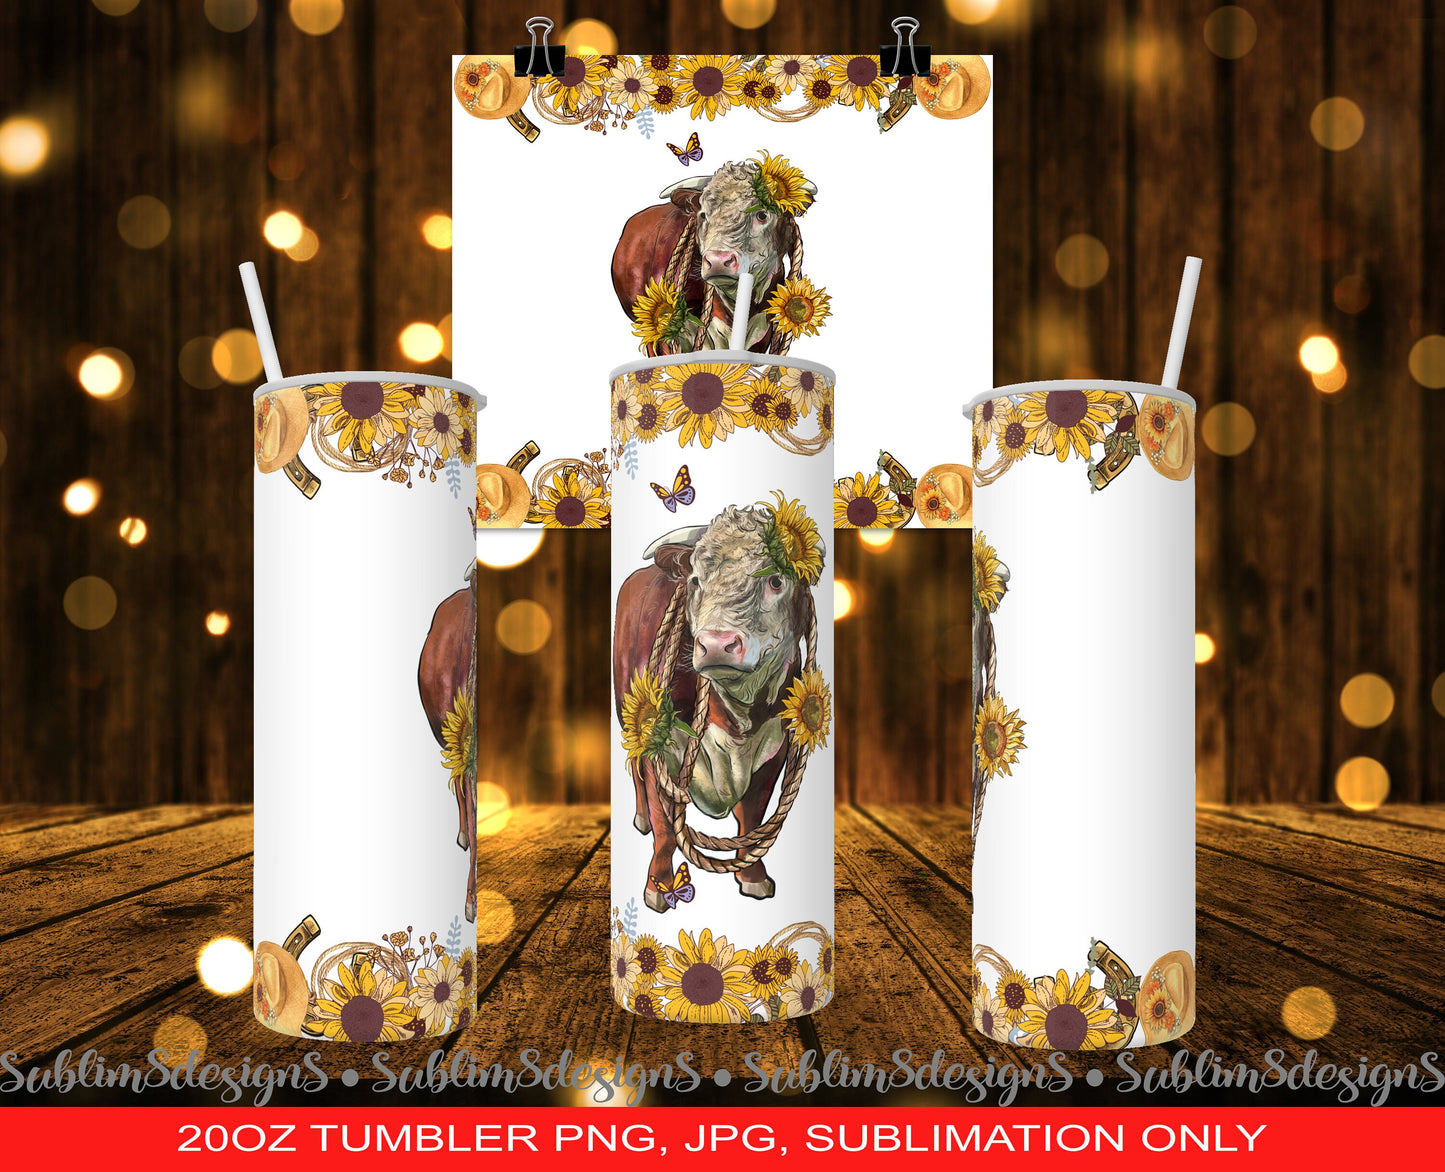 Sunflower Cow 20oz Tumbler Wrap Sublimation Design PNG and JPG ONLY